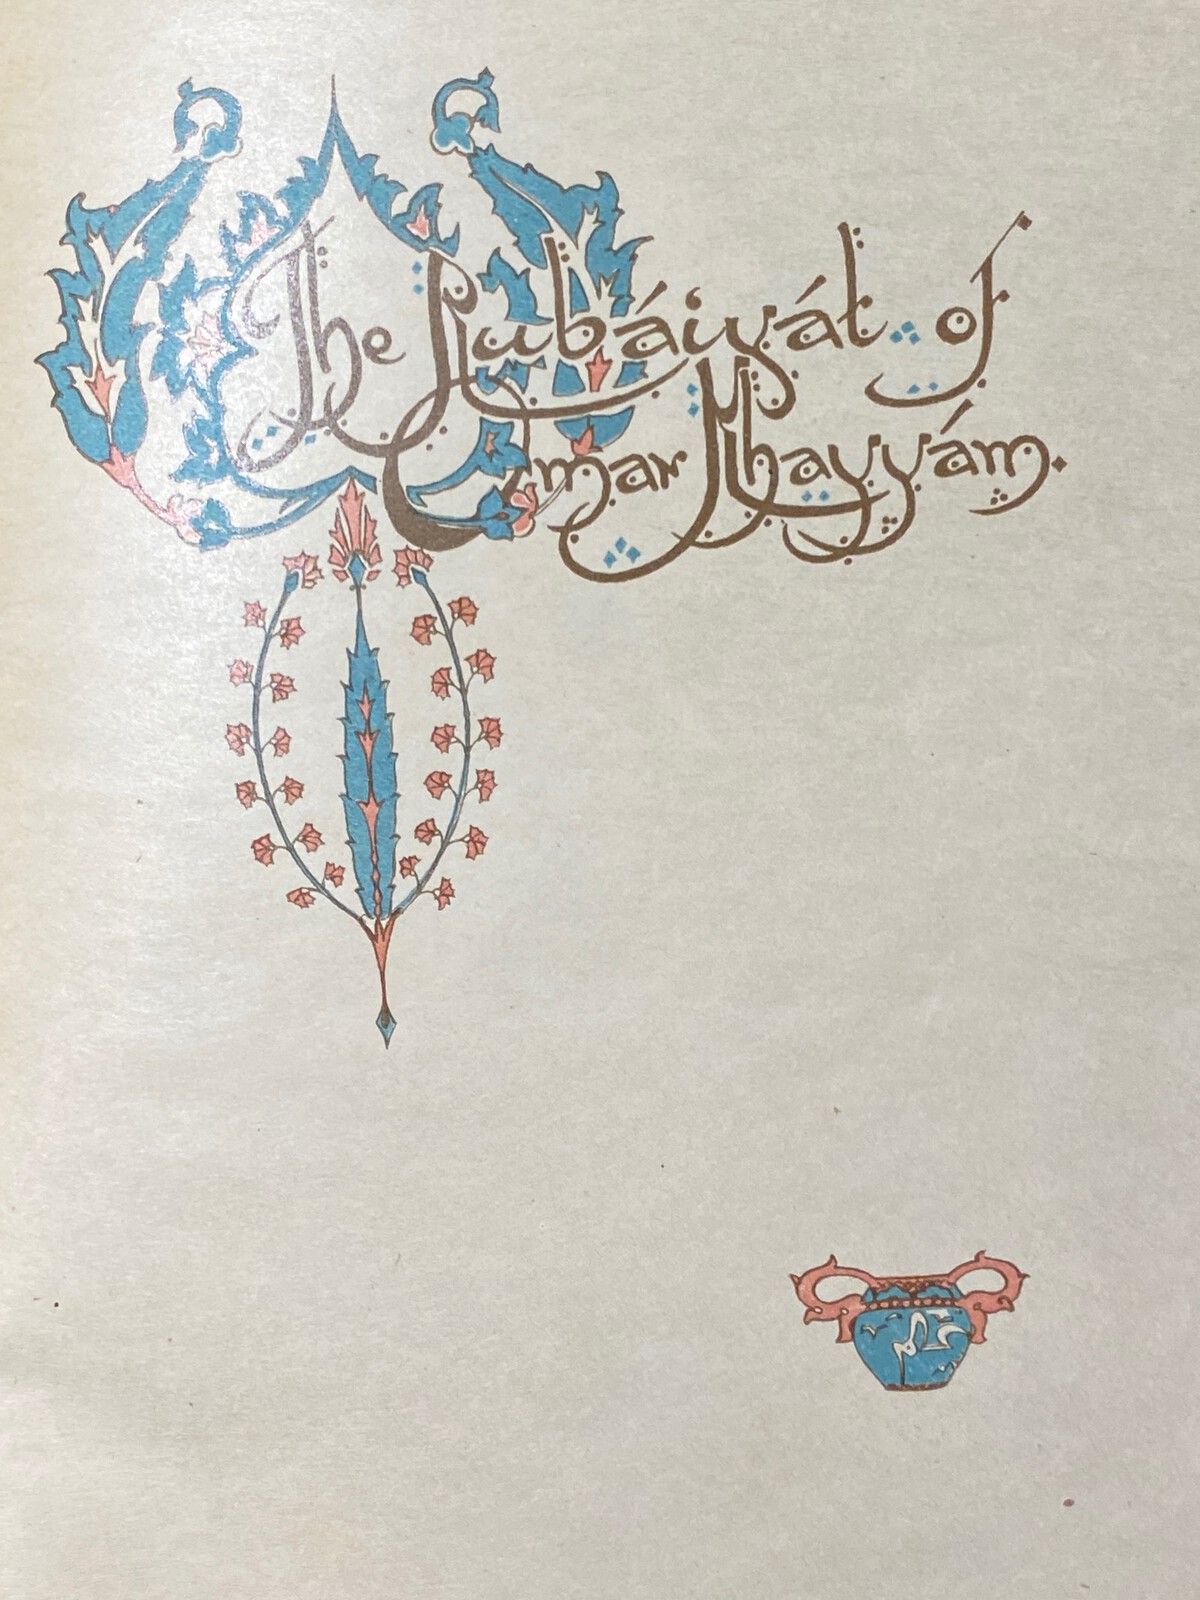 Smaller, but still ornate title page